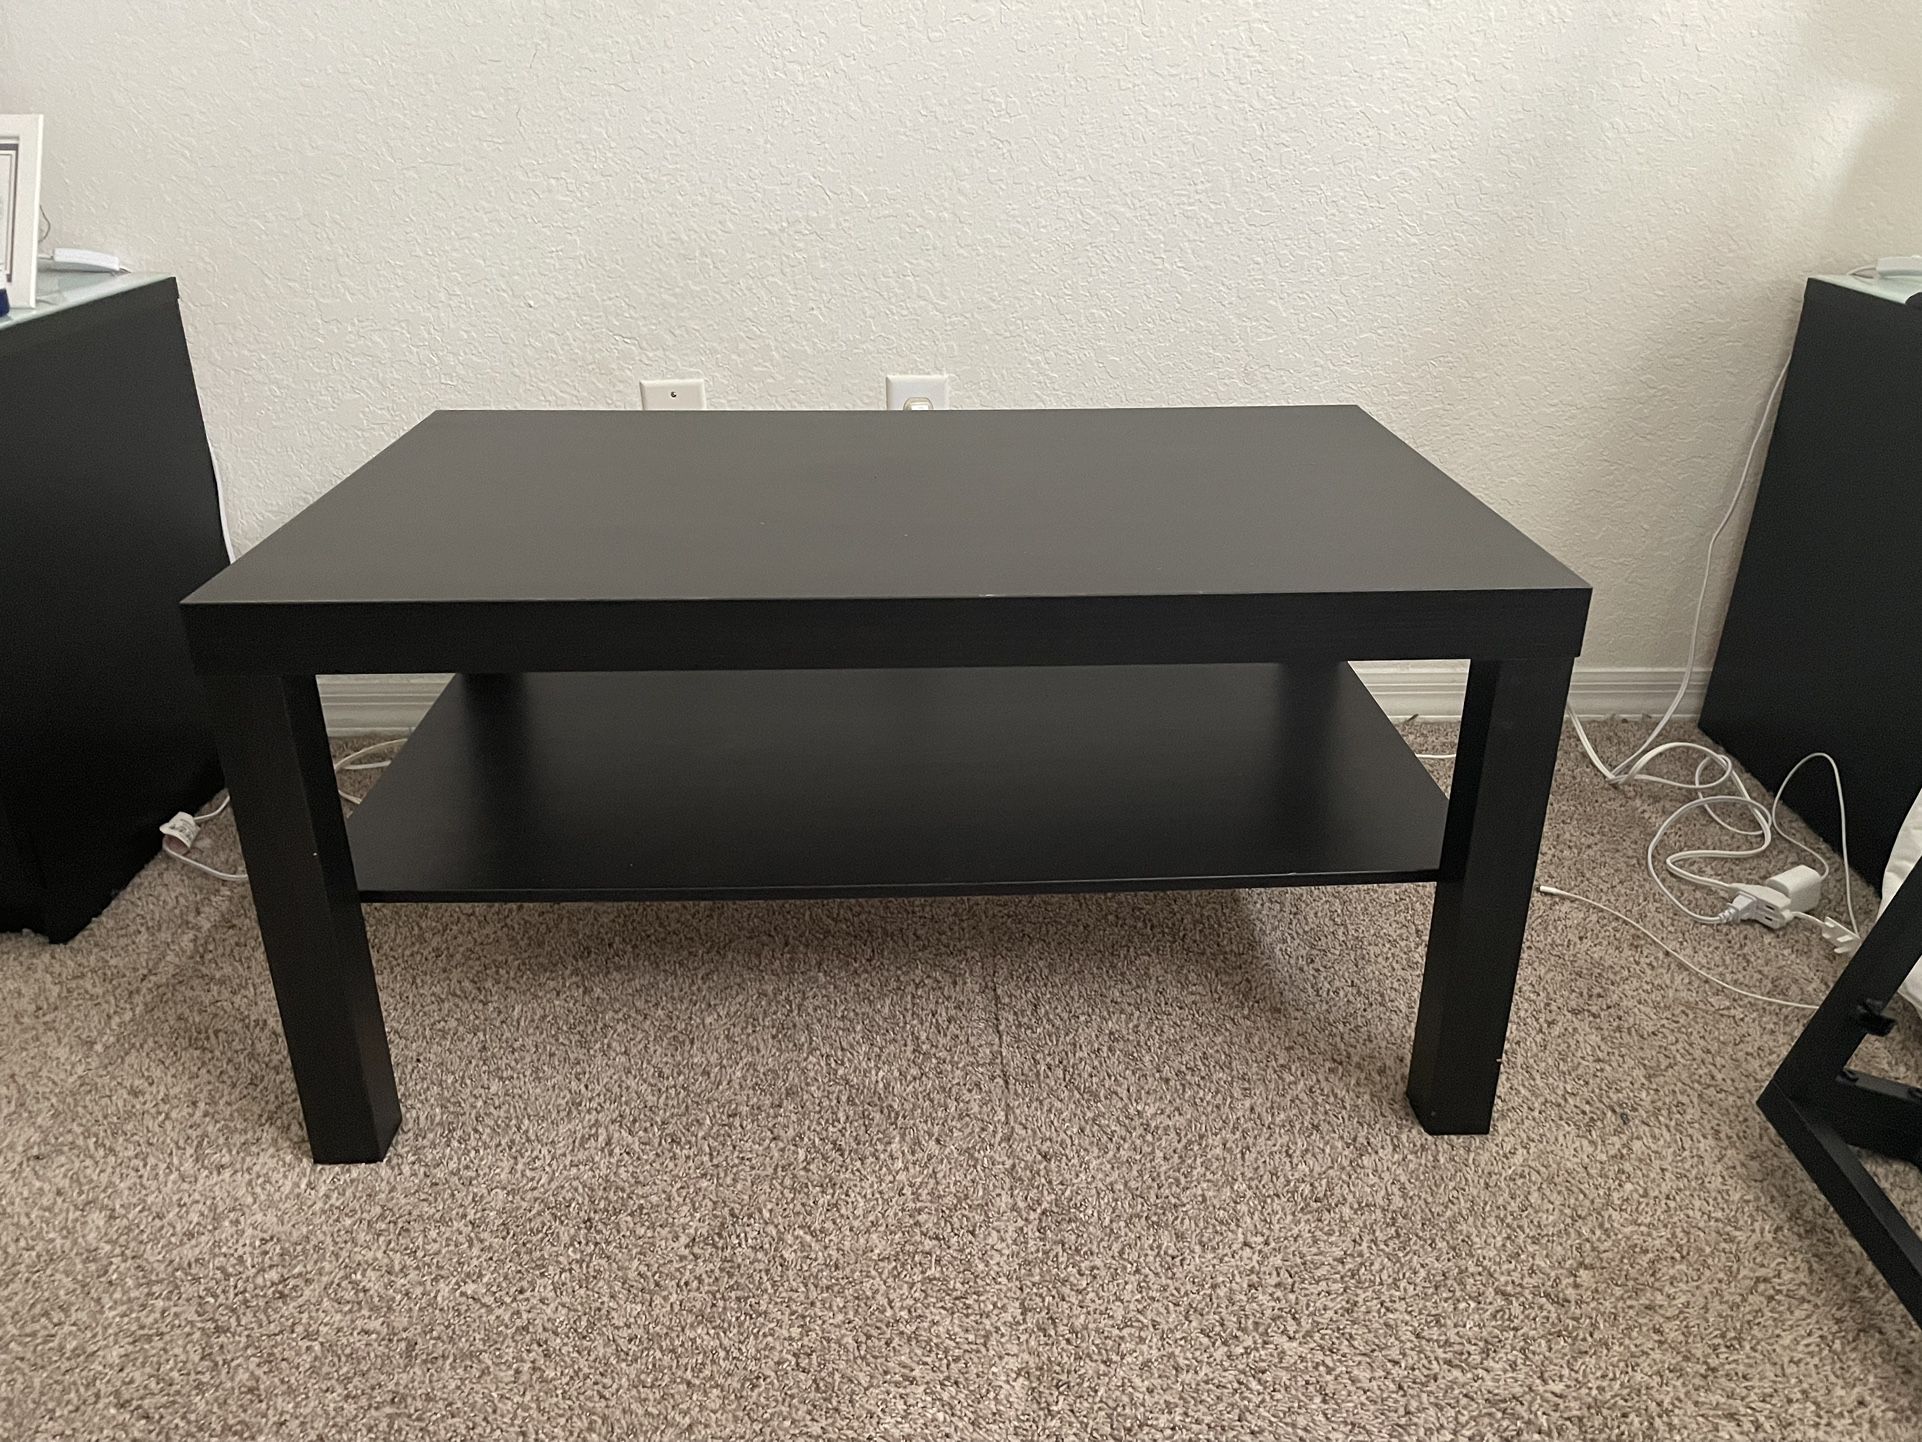 Ikea Coffee table and side table